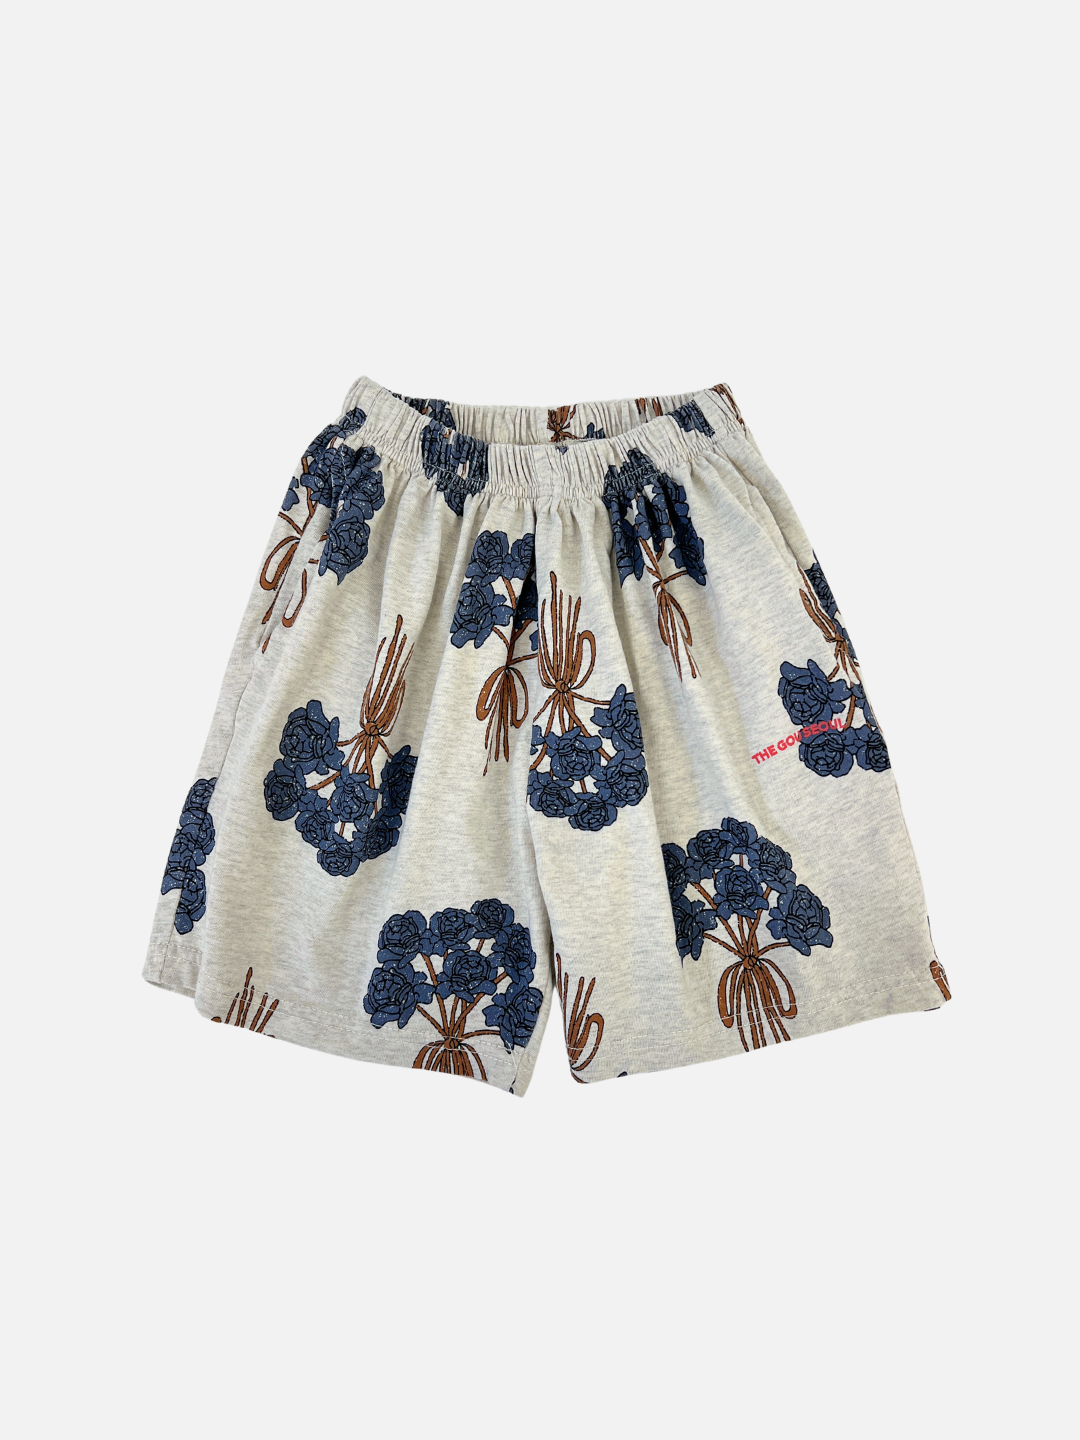 Front view of the kids' Bouquet Shorts. Warm gray cotton fabric with an all-over navy roses bouquet print. 